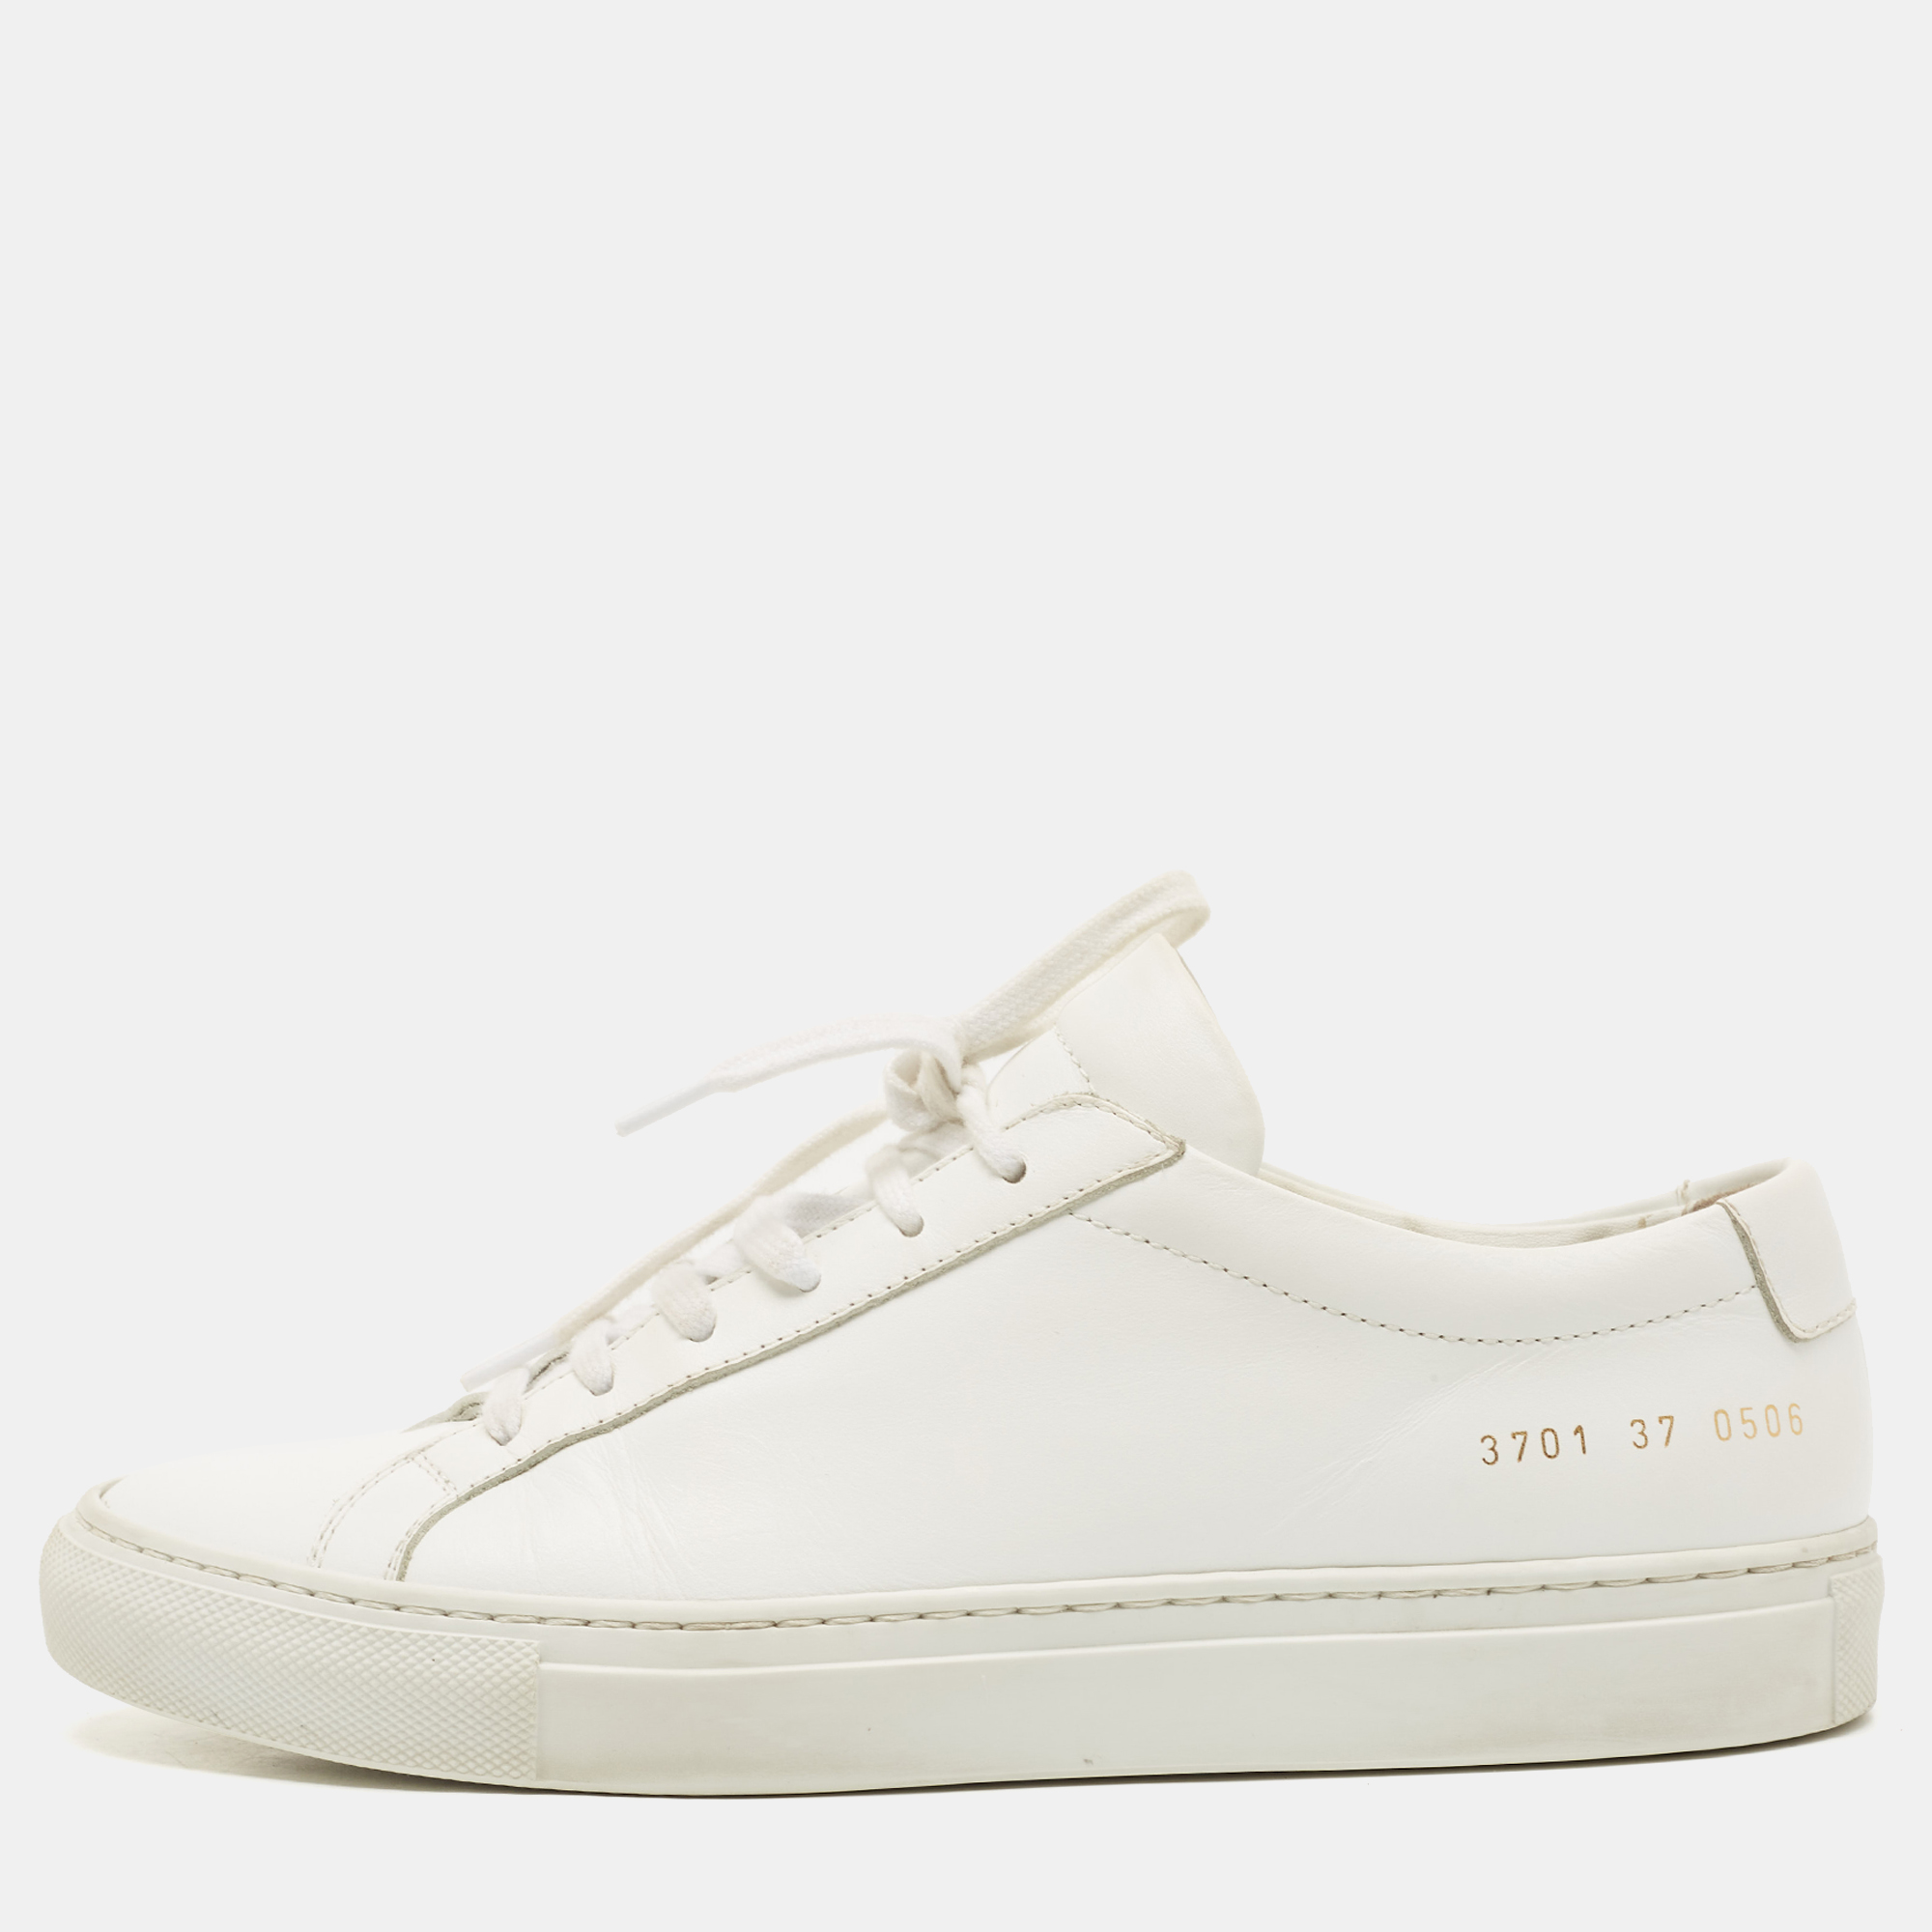 Pre-owned Common Projects White Leather Achilles Trainers Size 37